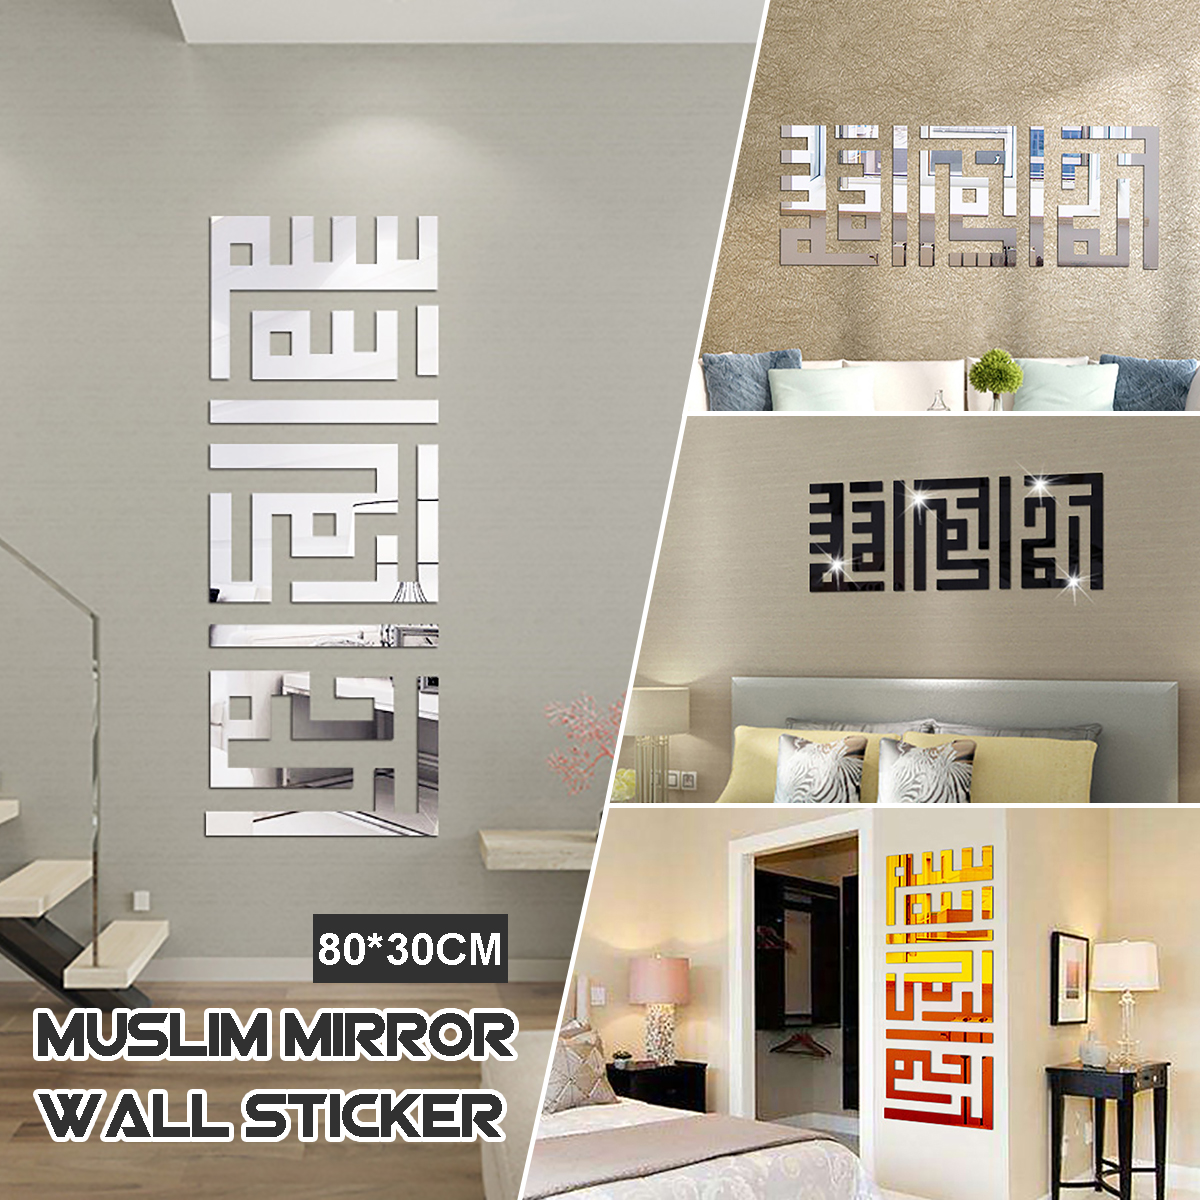 3D-Acrylic-Mirror-Wall-Stickers-Vinyl-Decals-Home-Living-Room-Environmentally-Friendly-Remove-Wall-S-1748534-1